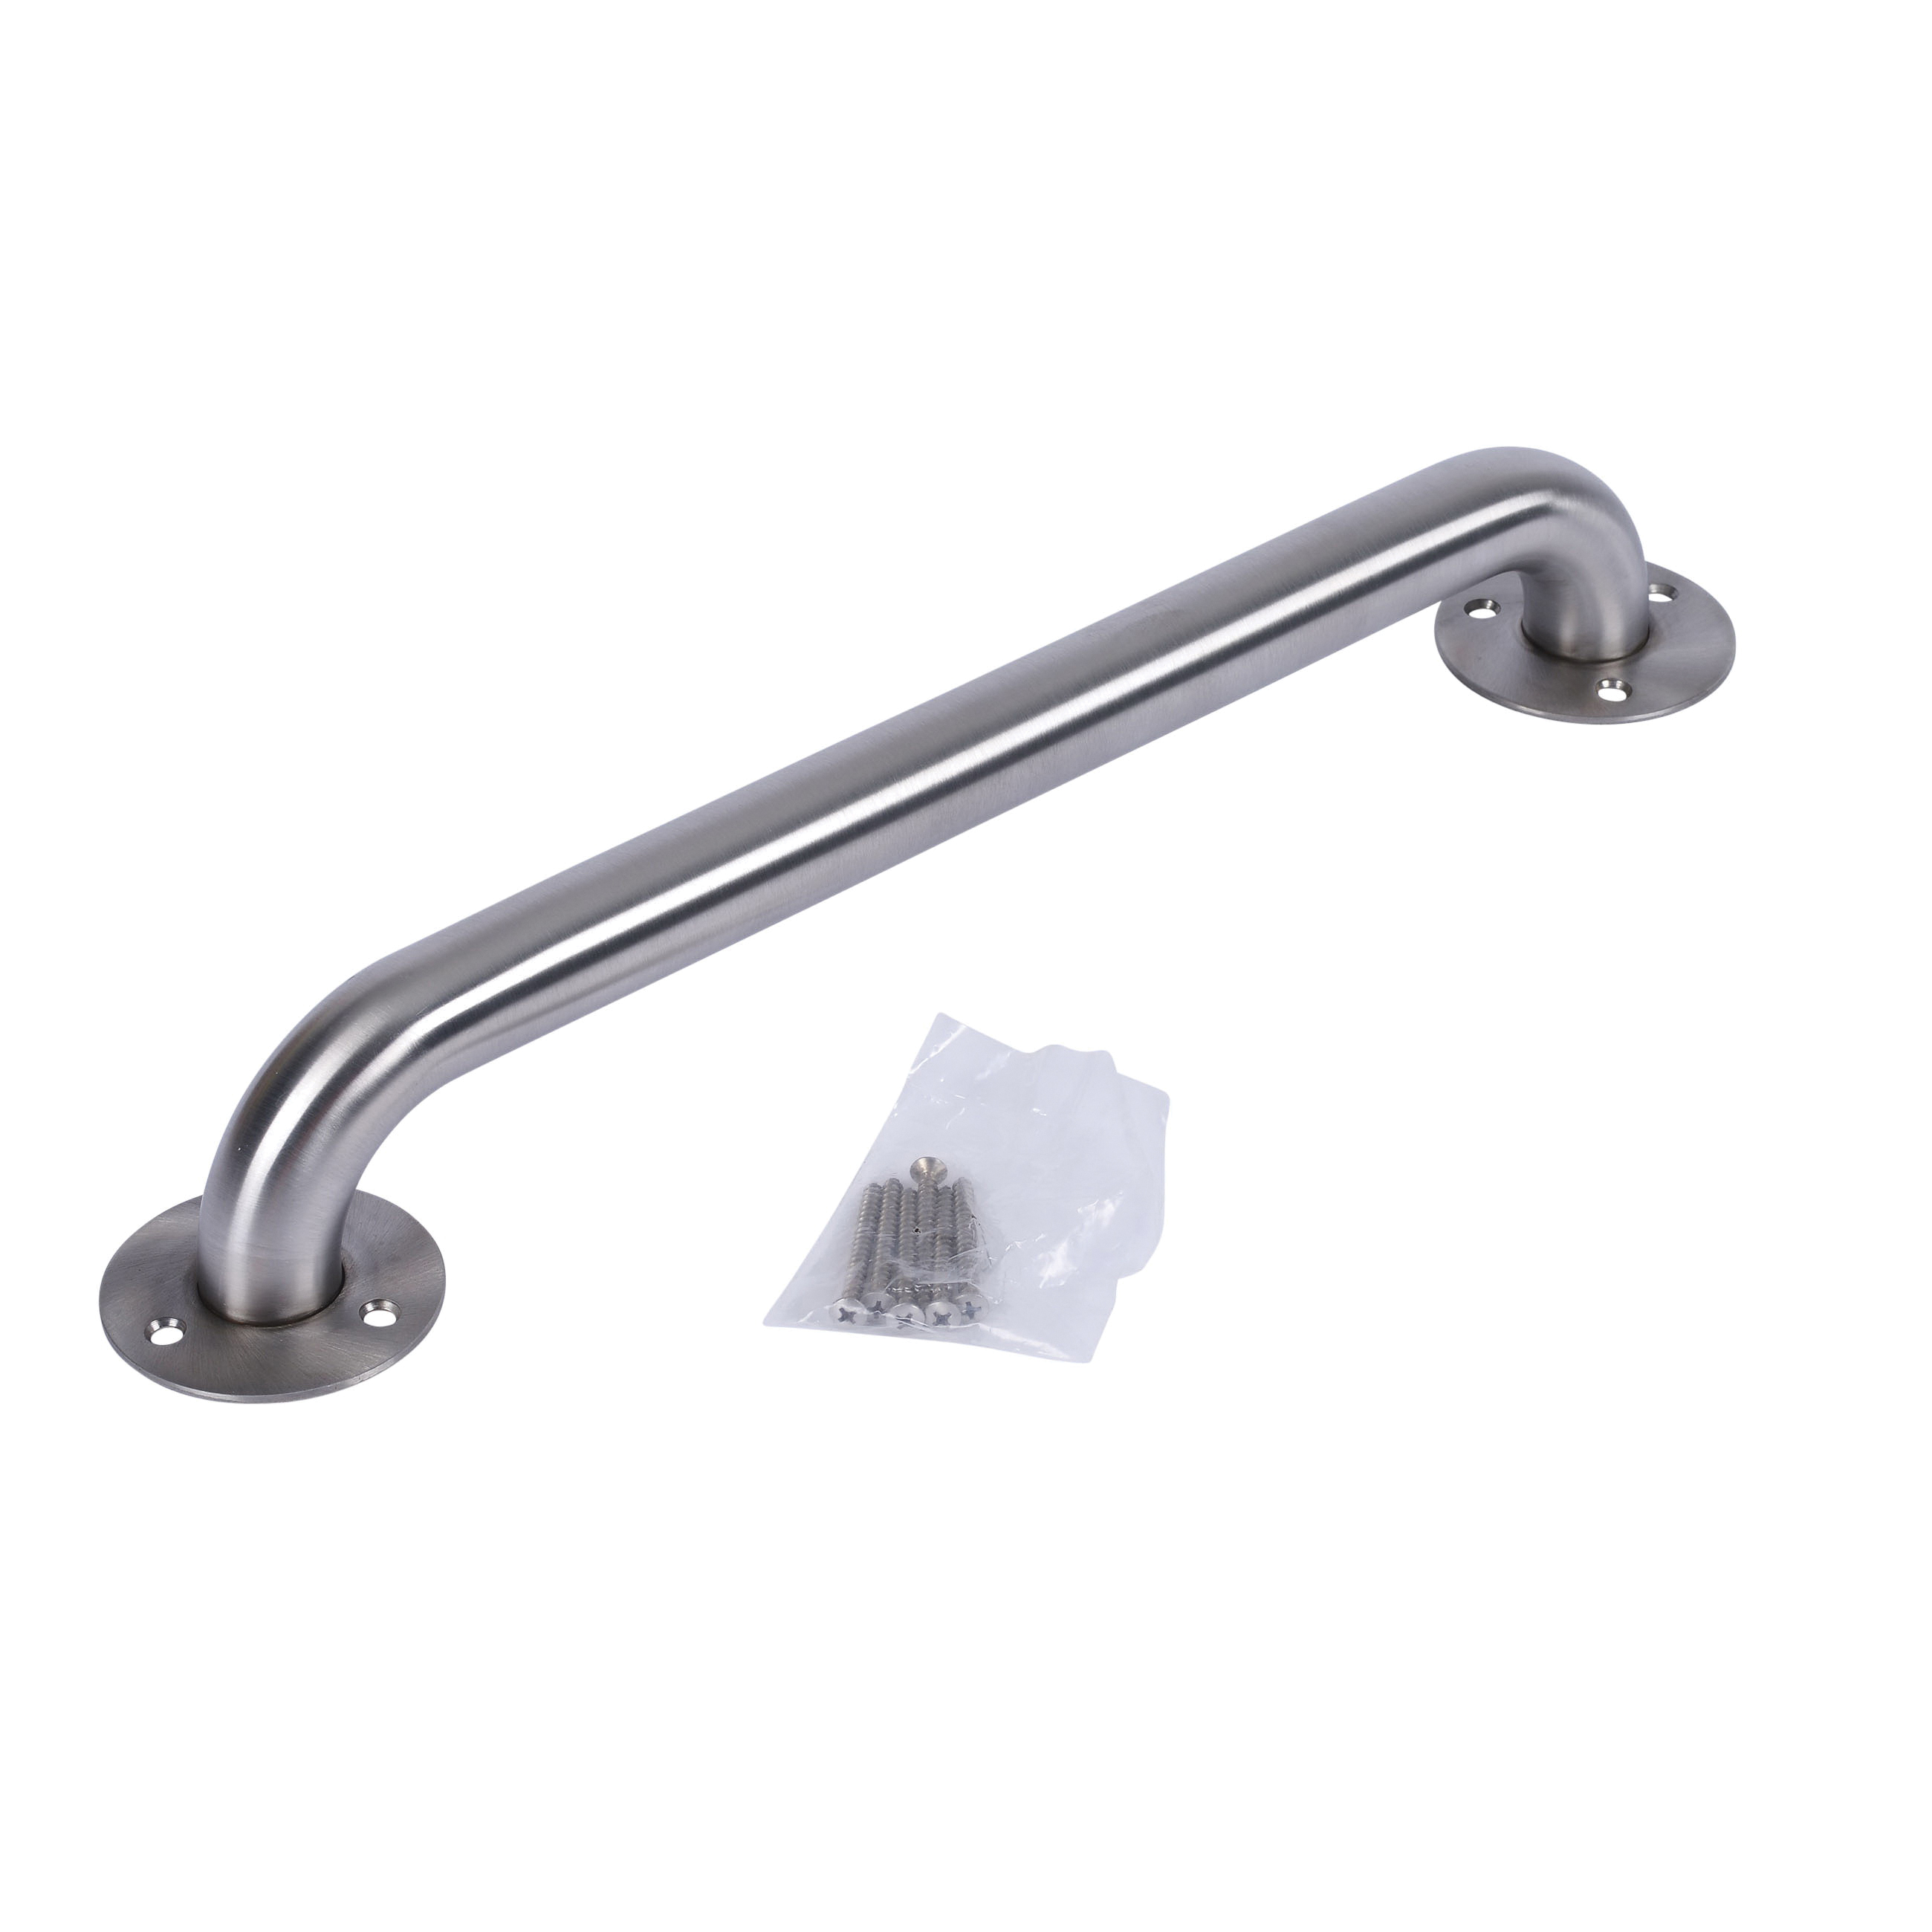 Dearborn® DB8724 Grab Bar, 1-1/4 in Dia x 24 in L, Satin, 304 Stainless Steel, Import